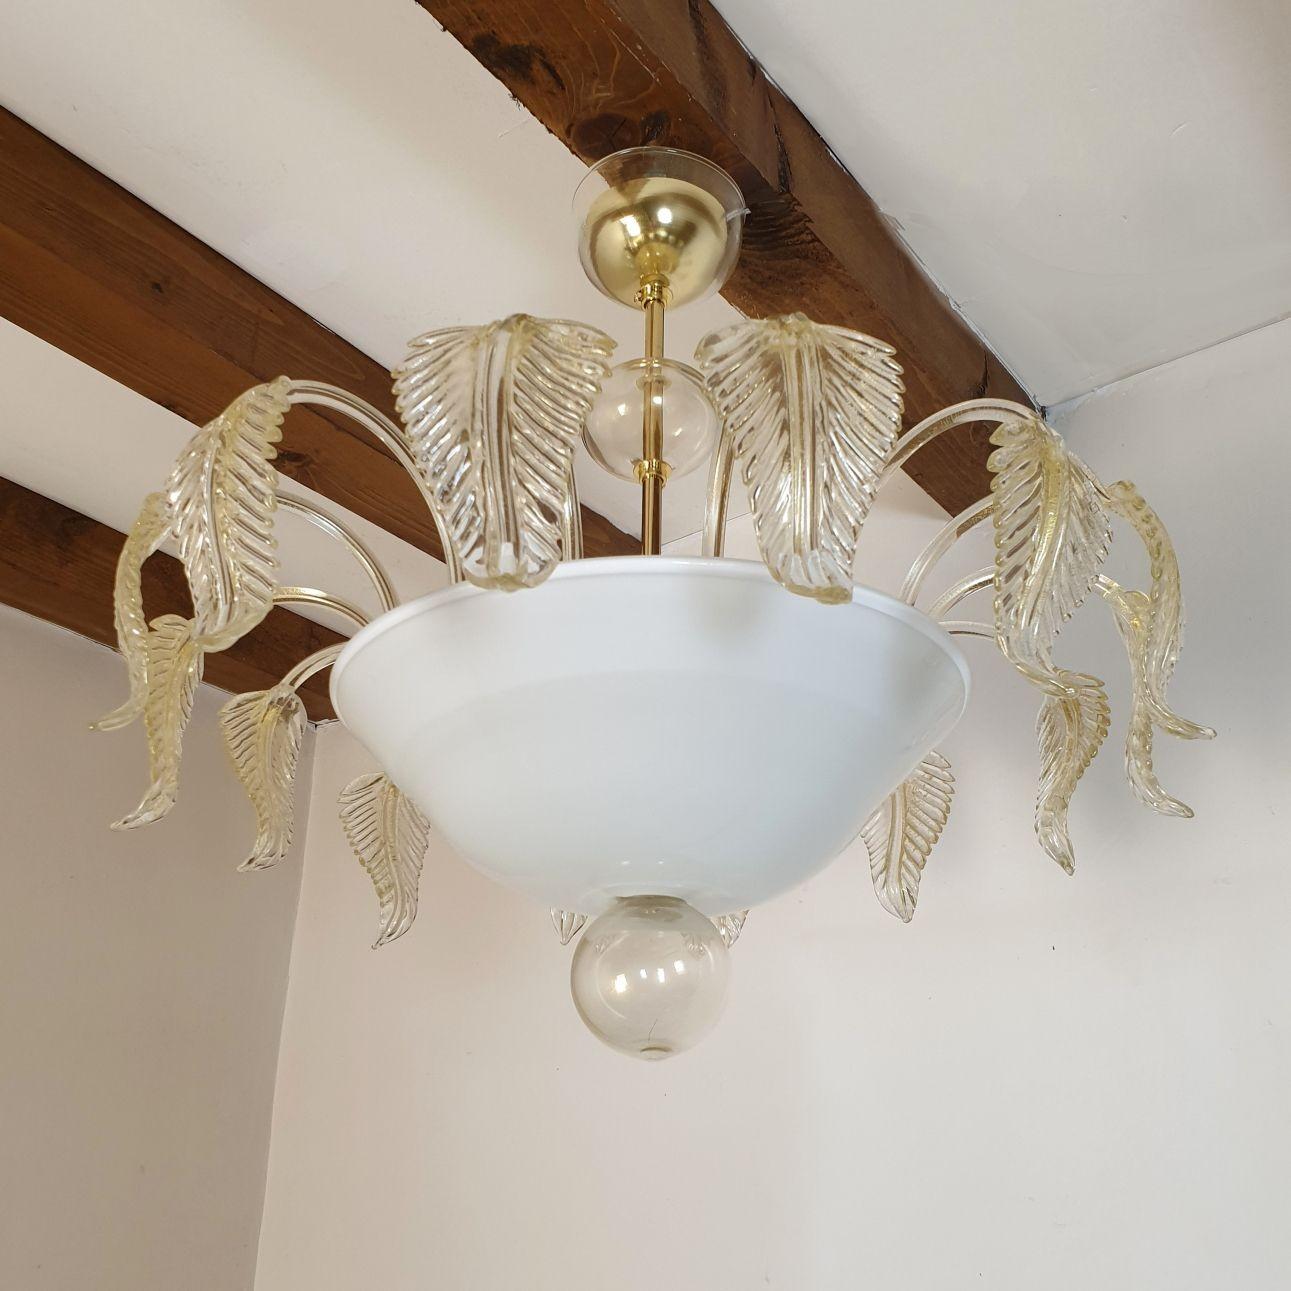 Medium size Mid-Century Modern Murano glass flush mount ceiling light, attributed to Seguso, Italy 1980s.
The chandelier is made of a white translucent bowl, nesting 3 lights, and clear and gold leaves around it.
The mounts are gold plated.
There